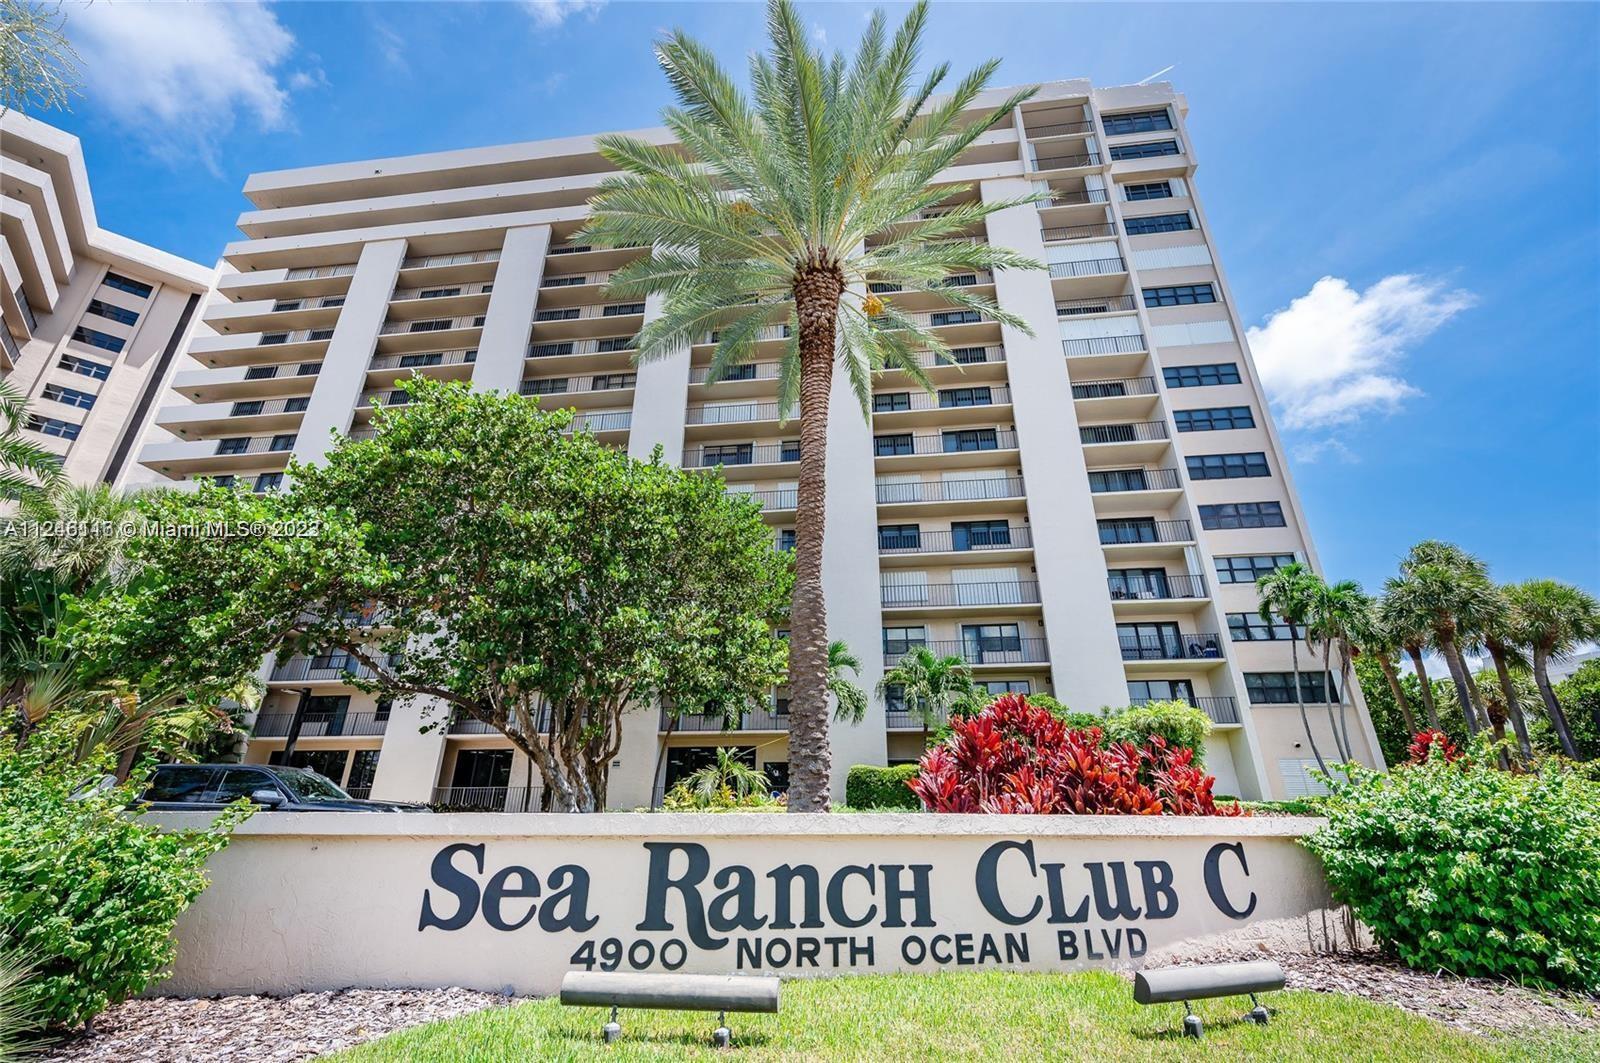 Experience resort style living in fantastic 2/2 oceanfront condo located in rarely available Sea Ran